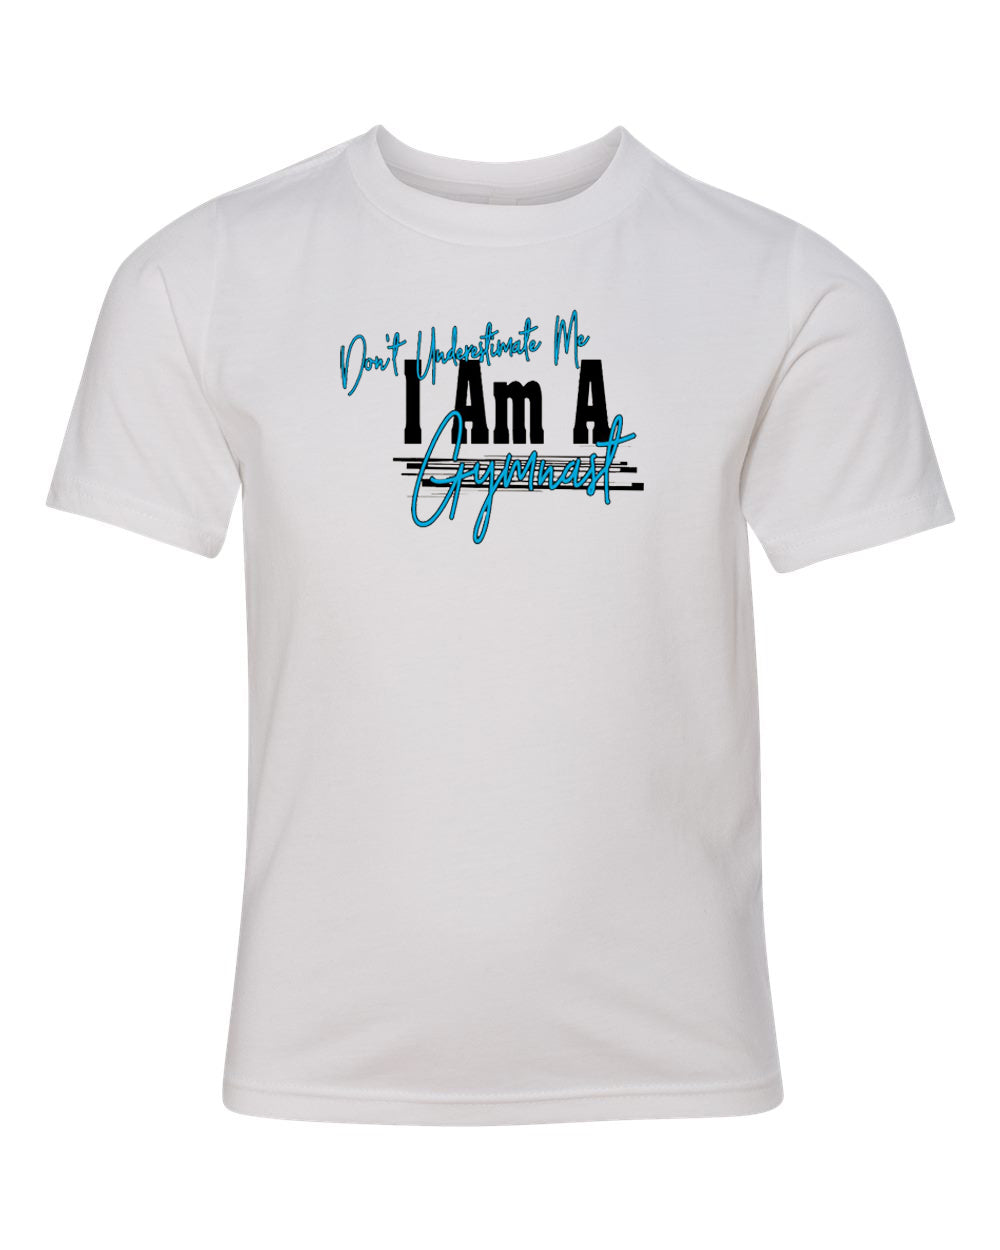 Don't Underestimate Me I Am A Gymnast Youth T-Shirt